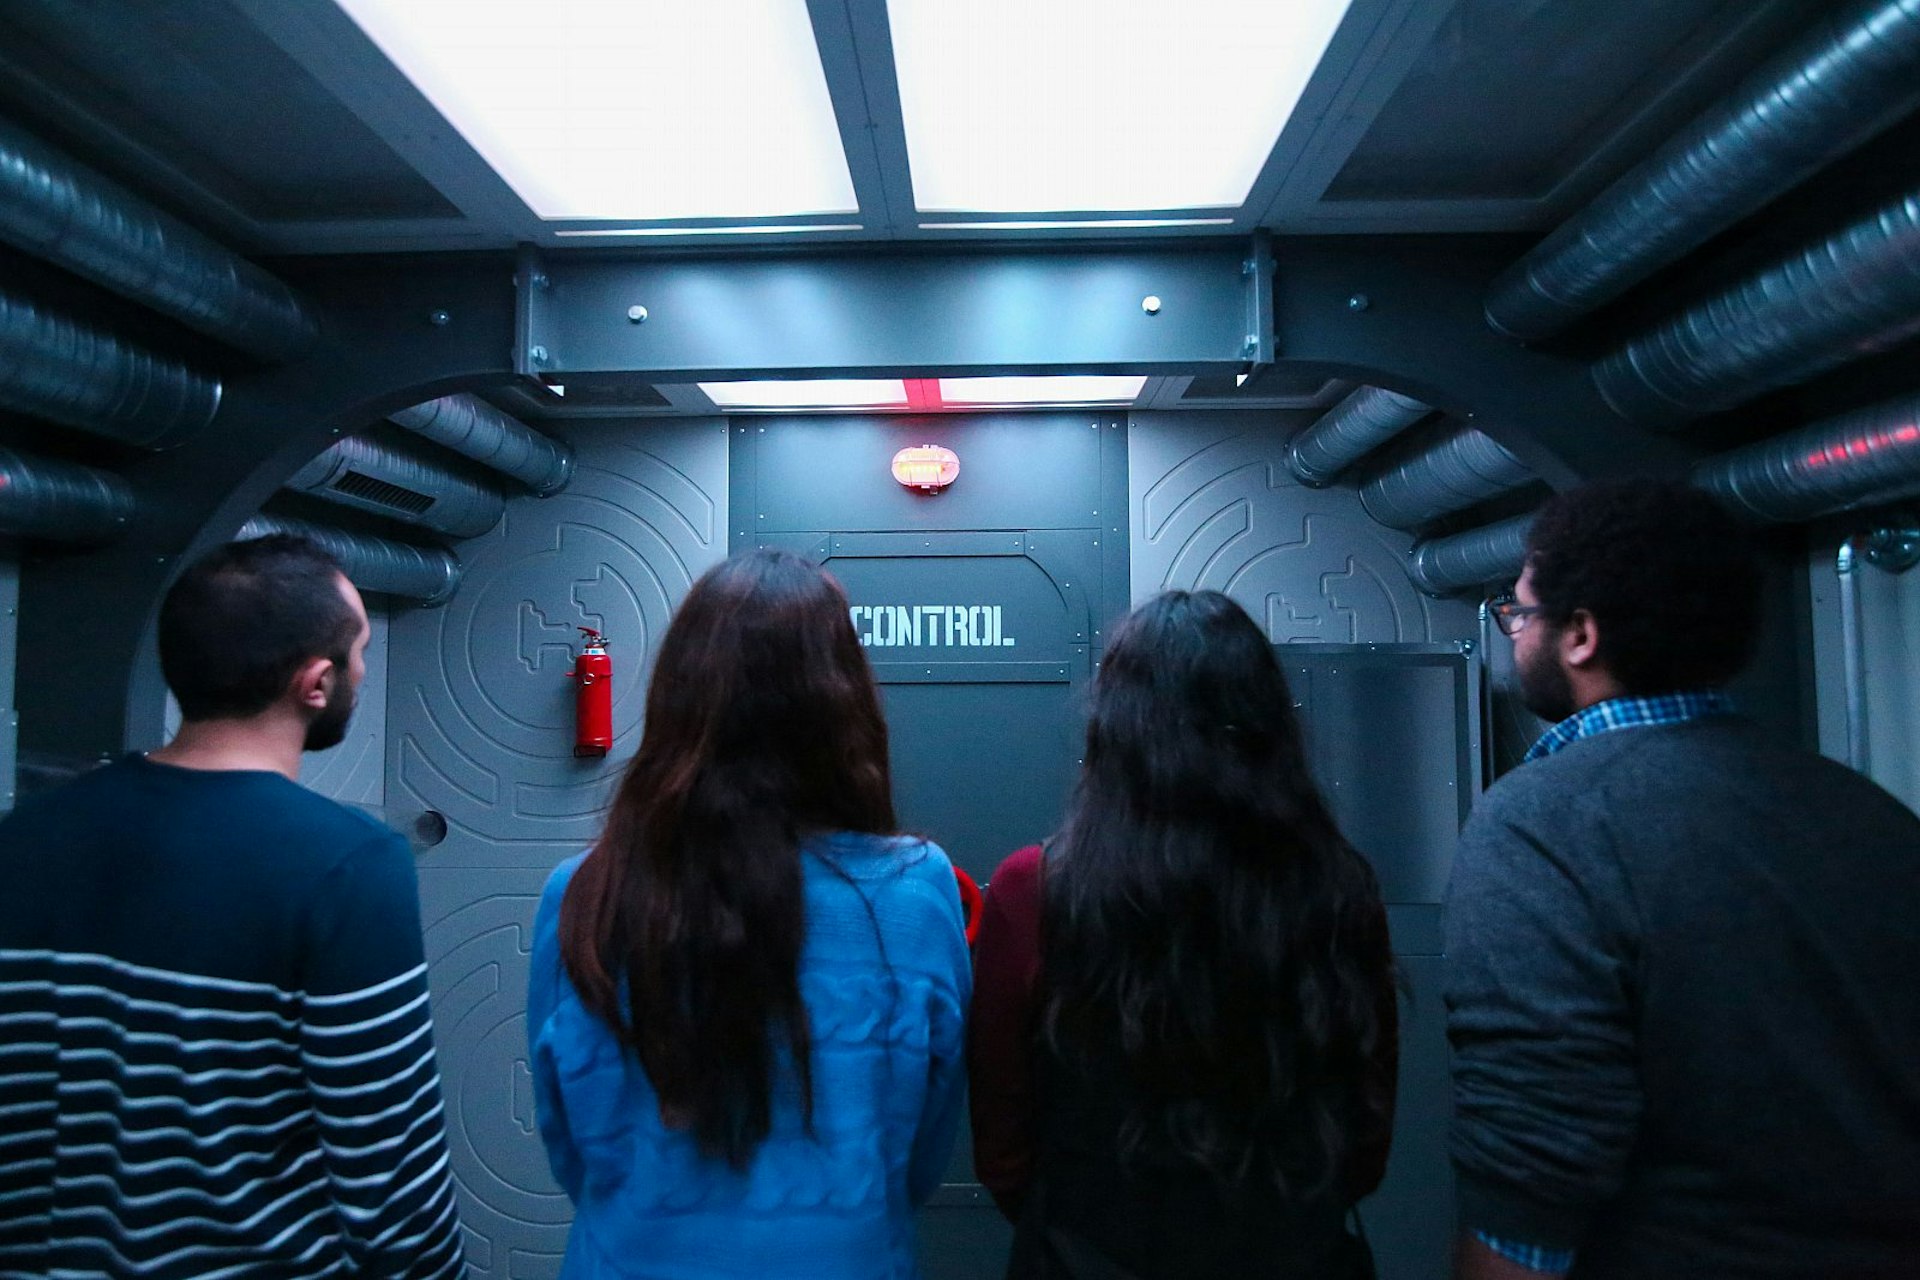 Four people stand with their backs to the camera facing a door that says "Control" in a grey industrial-looking room; the ceiling is covered with strip lights and silver pipes.